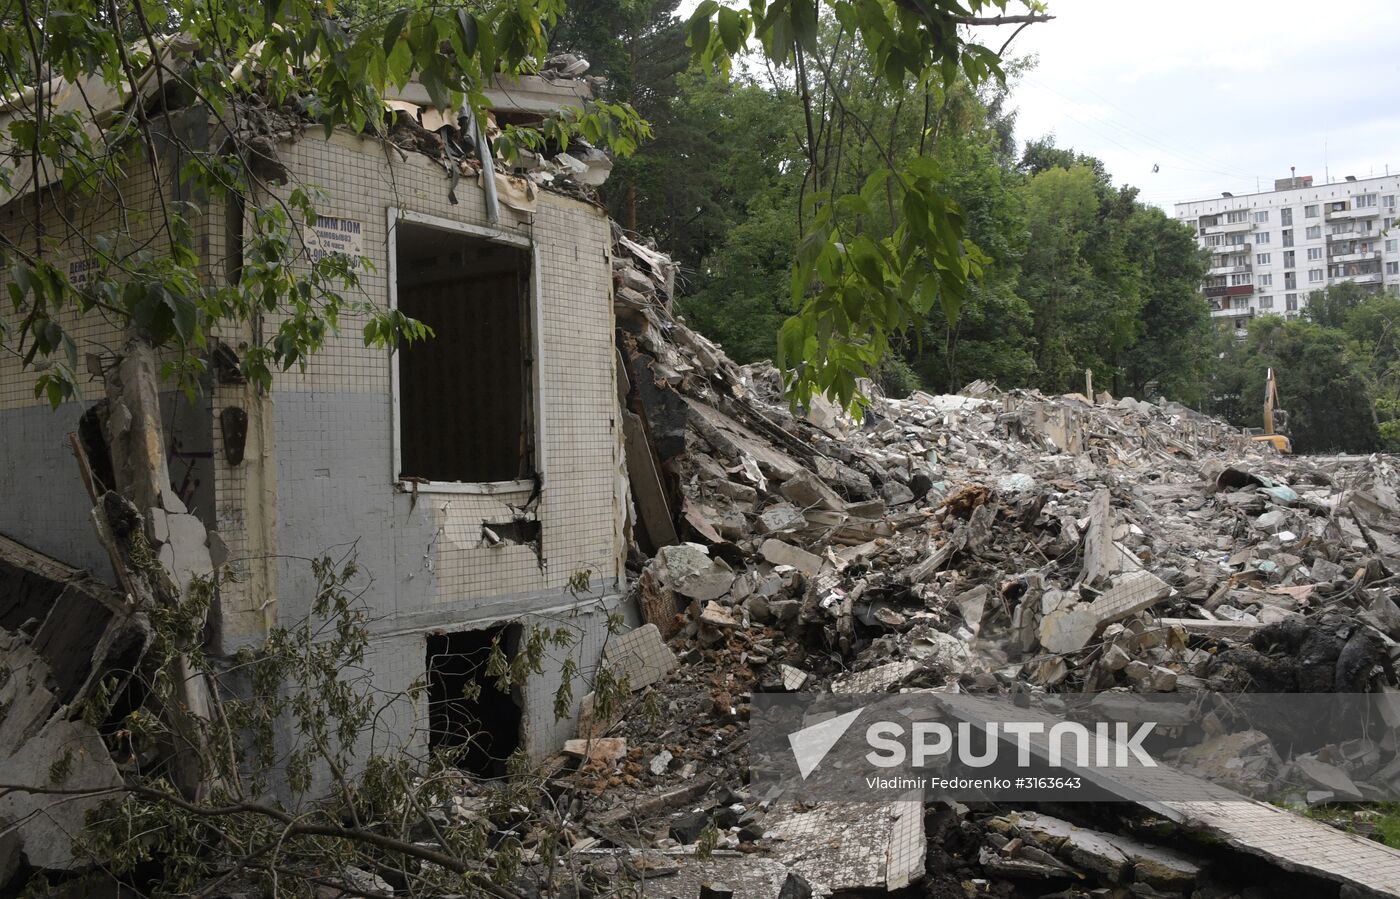 Demolishing five-story residential building on Molodtsova Street in Moscow